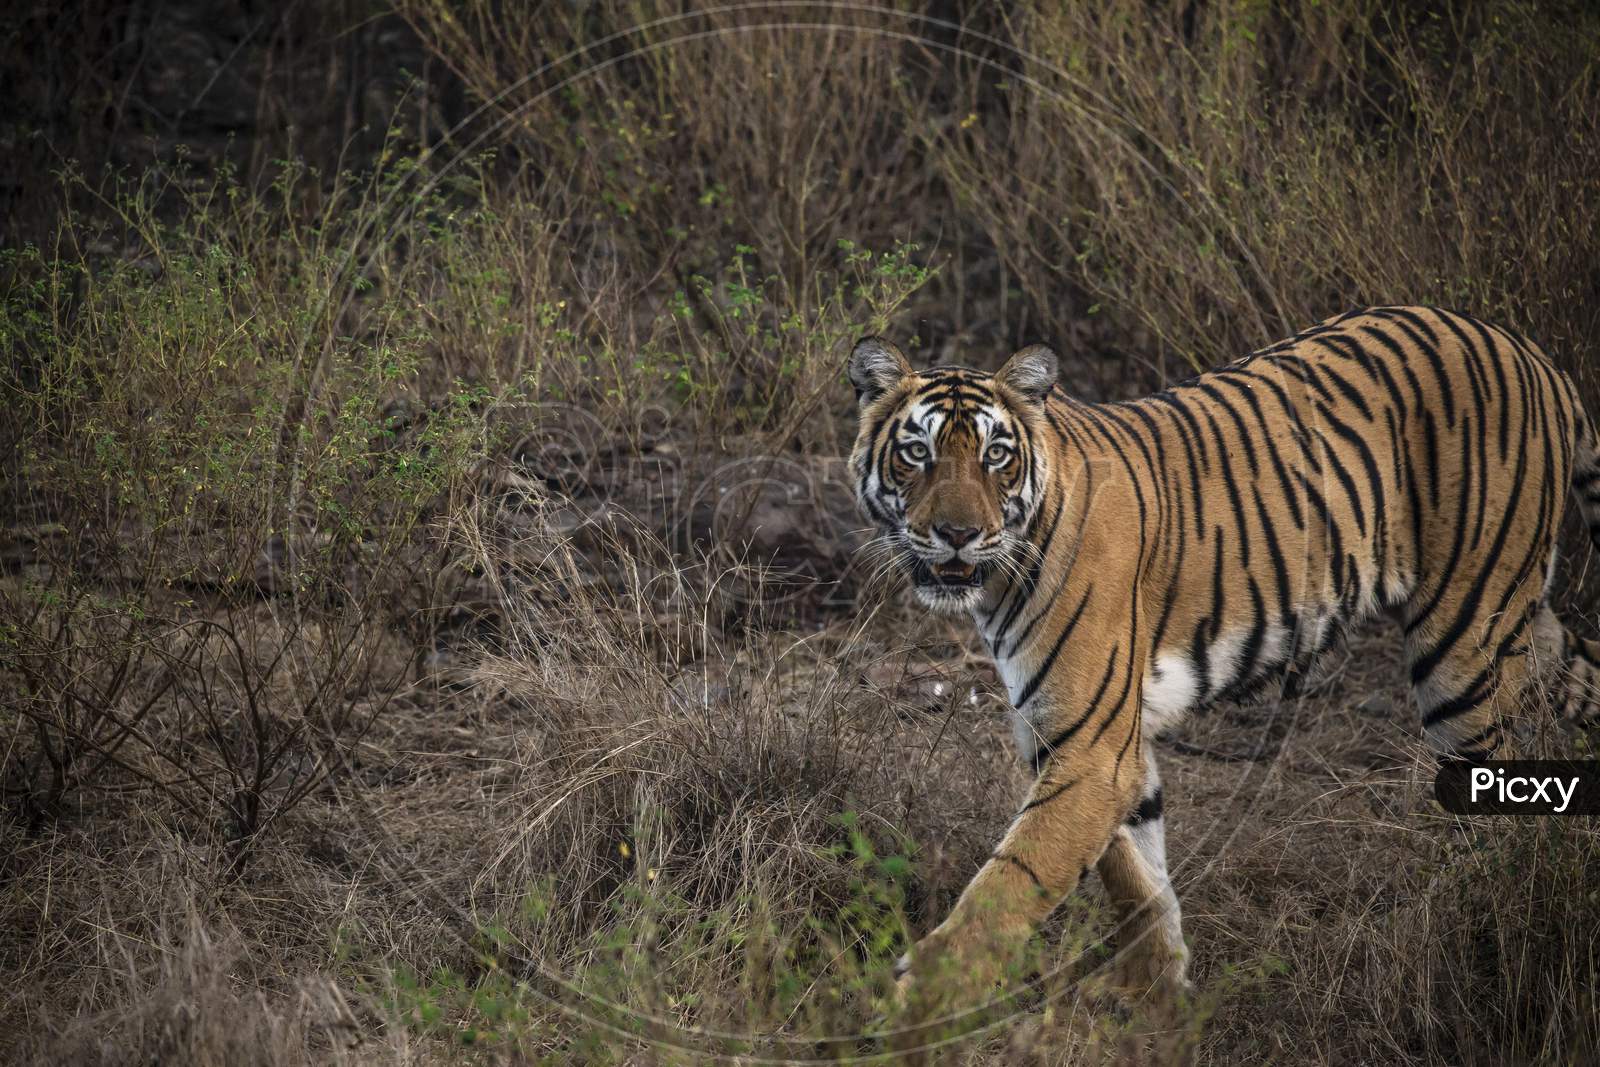 A Royal Bengal tiger walking in Forest